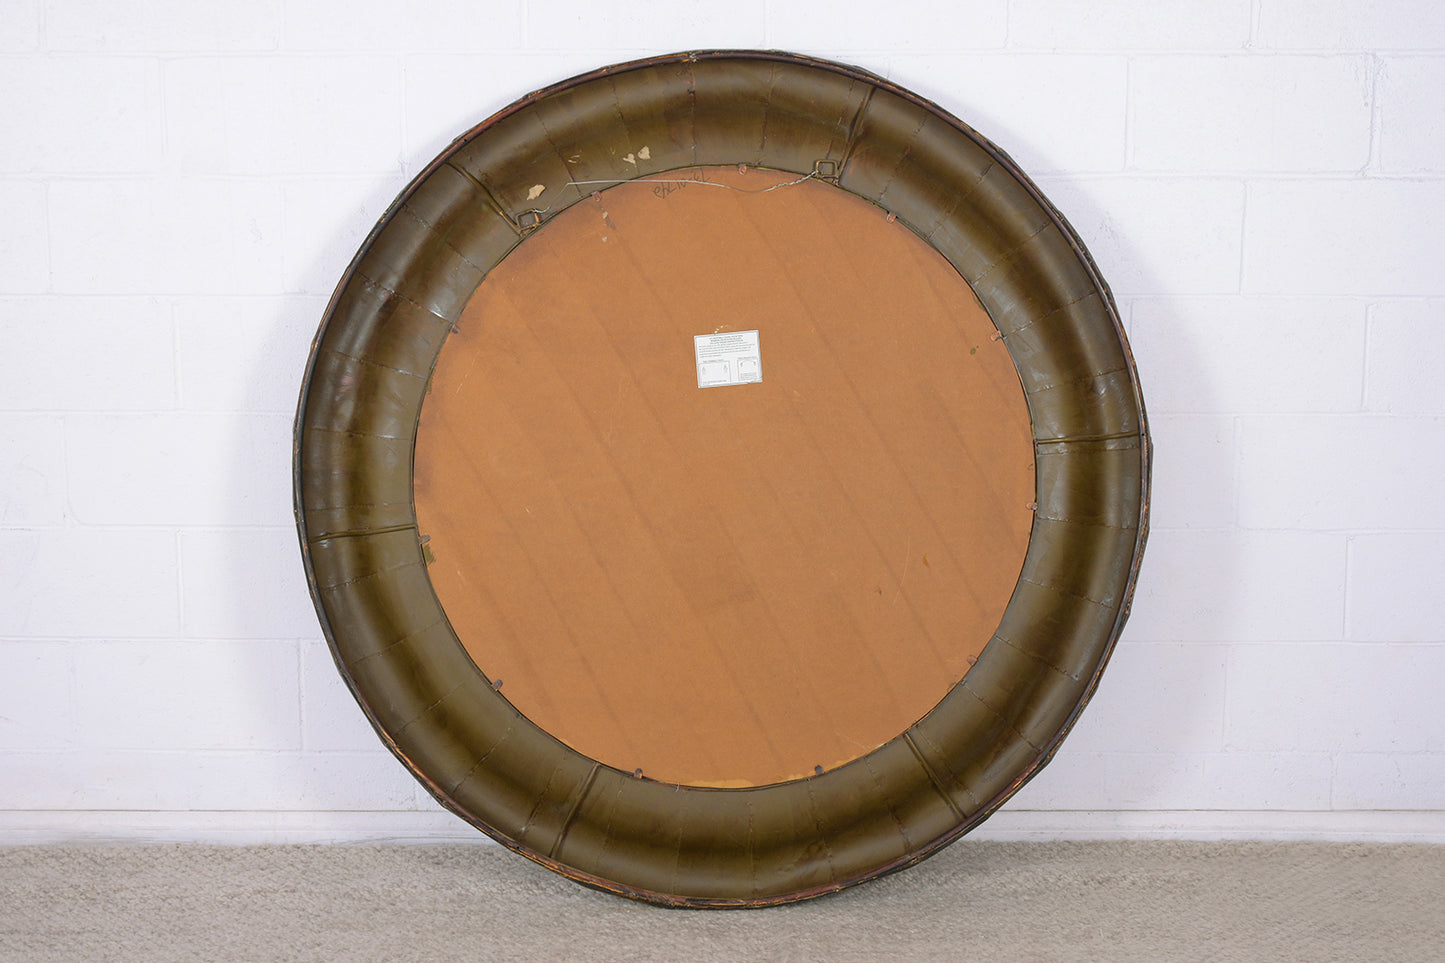 1970s Mid-Century Modern Circular Mirror with Parchment Frame - 40" Diameter